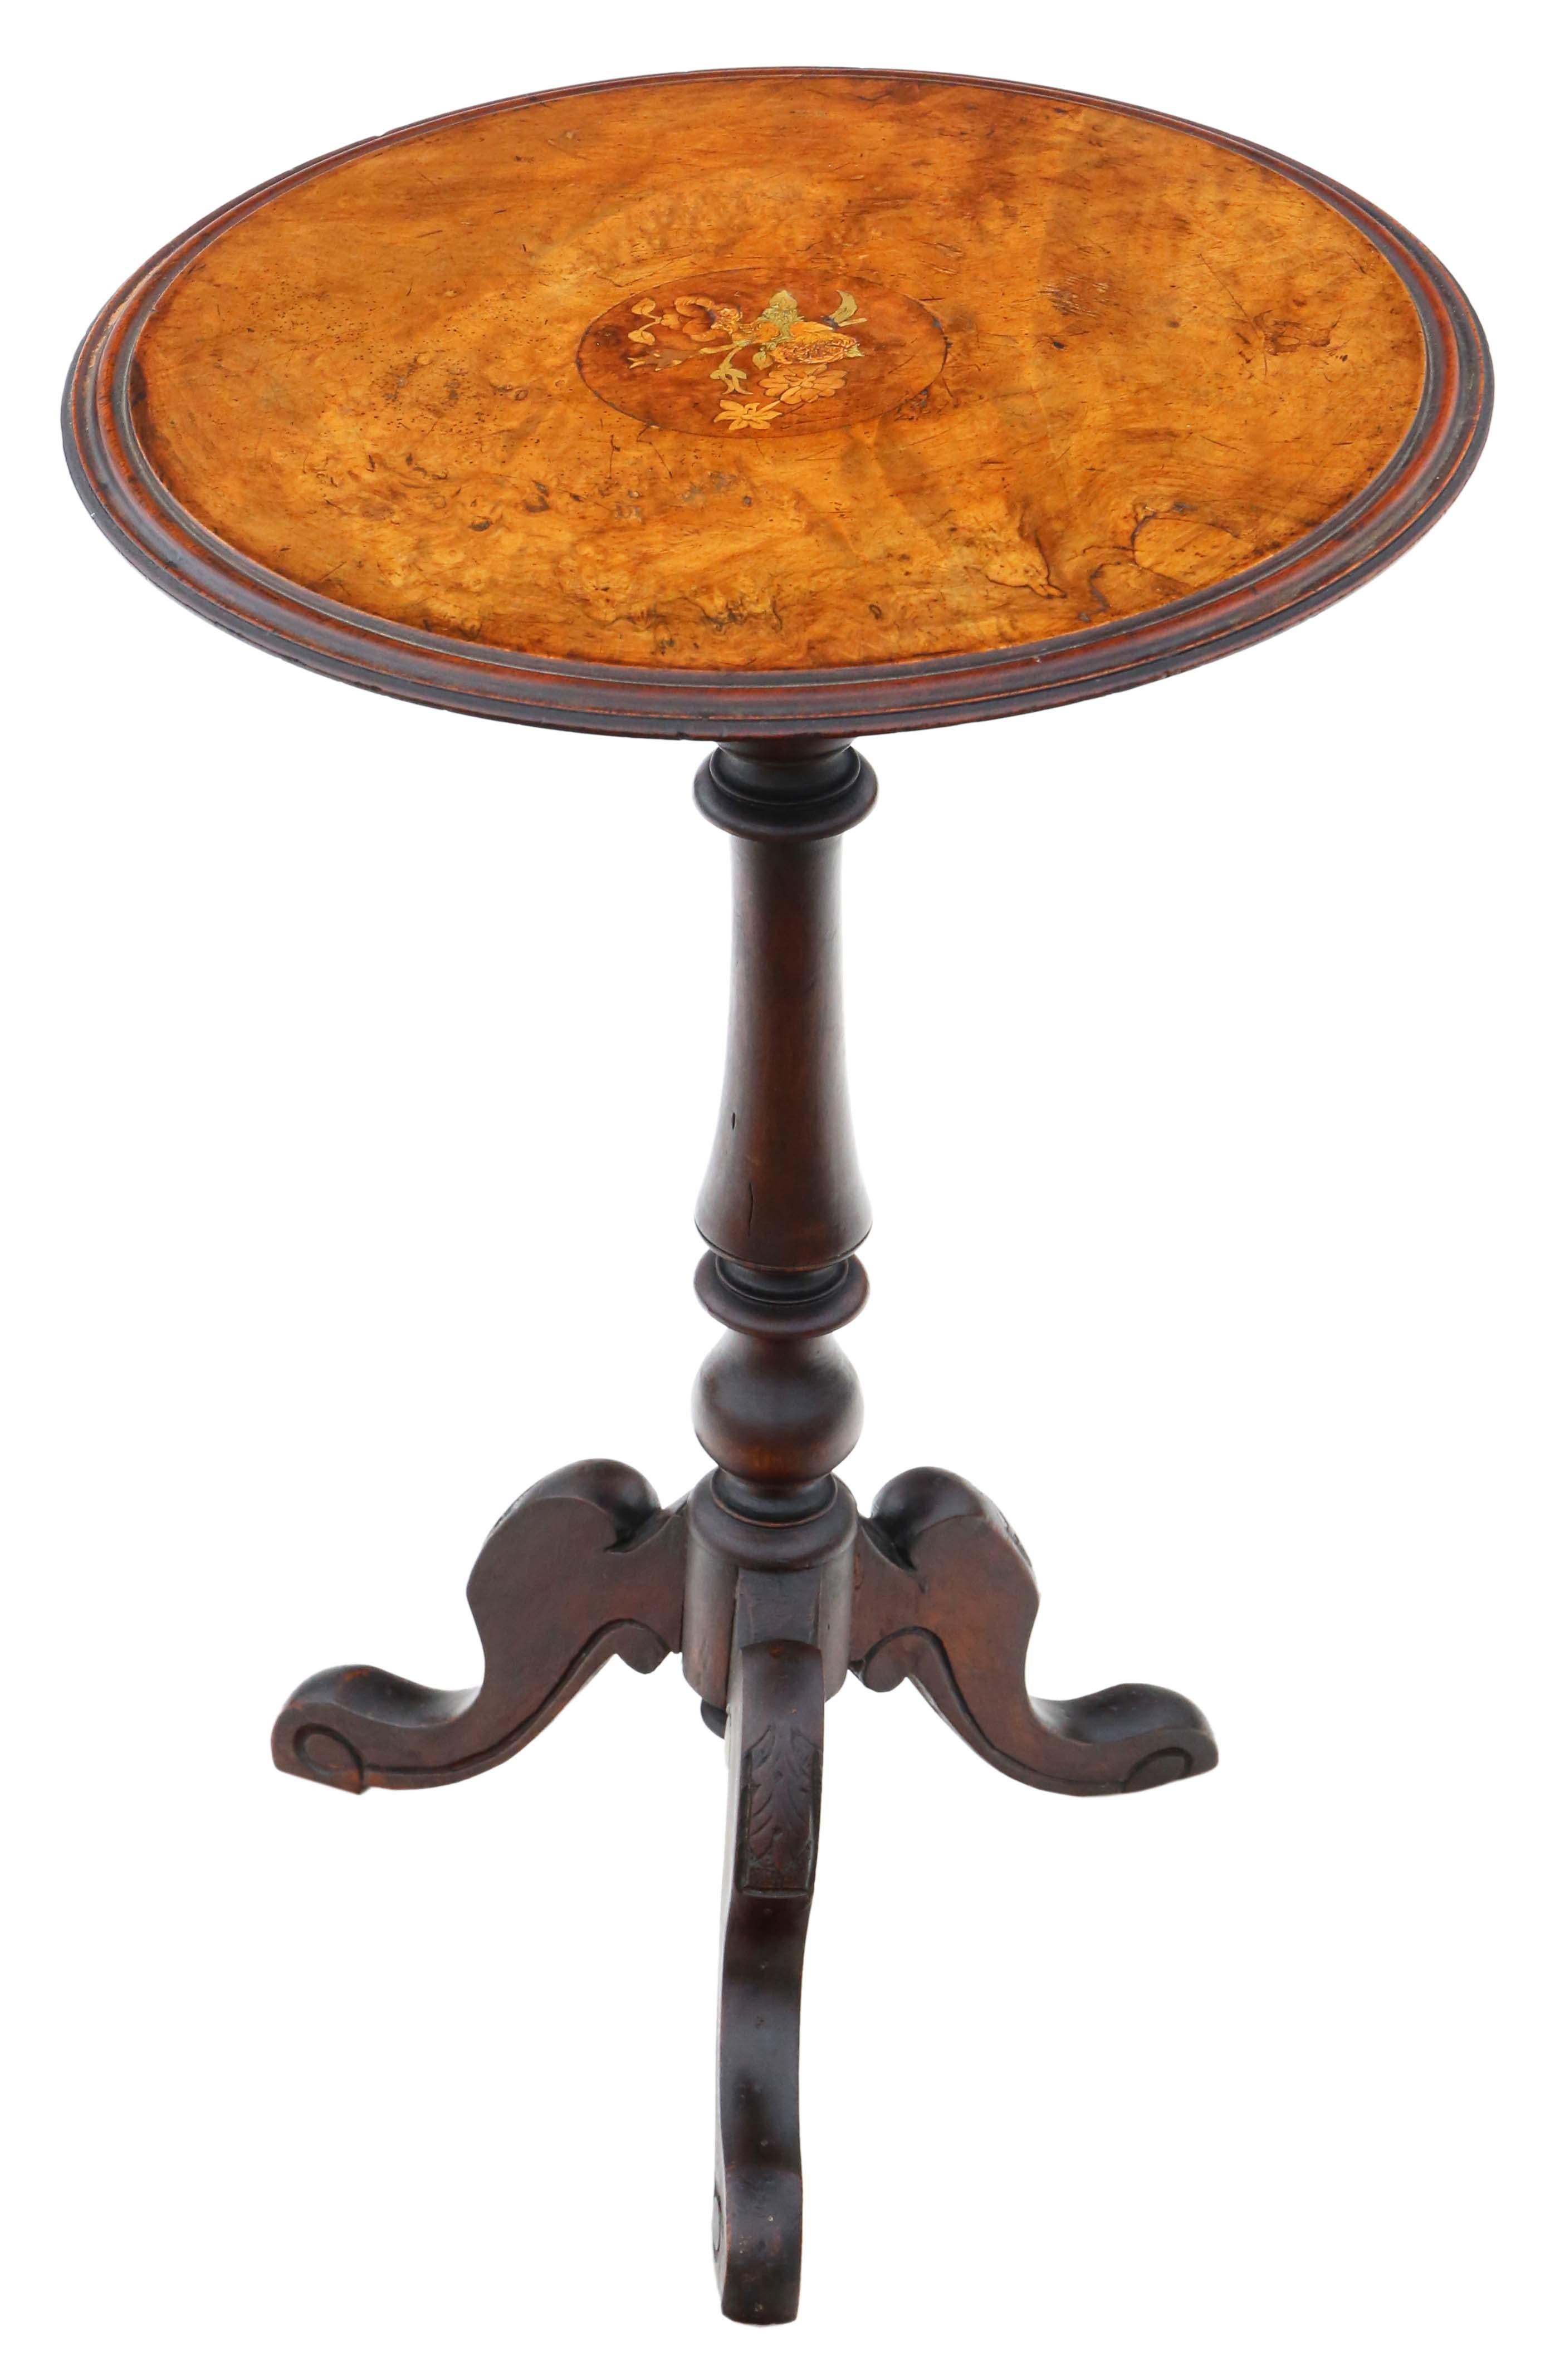 Antique quality burr walnut marquetry inlaid wine side or occasional table 19th Century.

Solid with no loose joints or woodworm. A charming table with lovely marquetry decoration.

Would look great in the right location!

Overall maximum